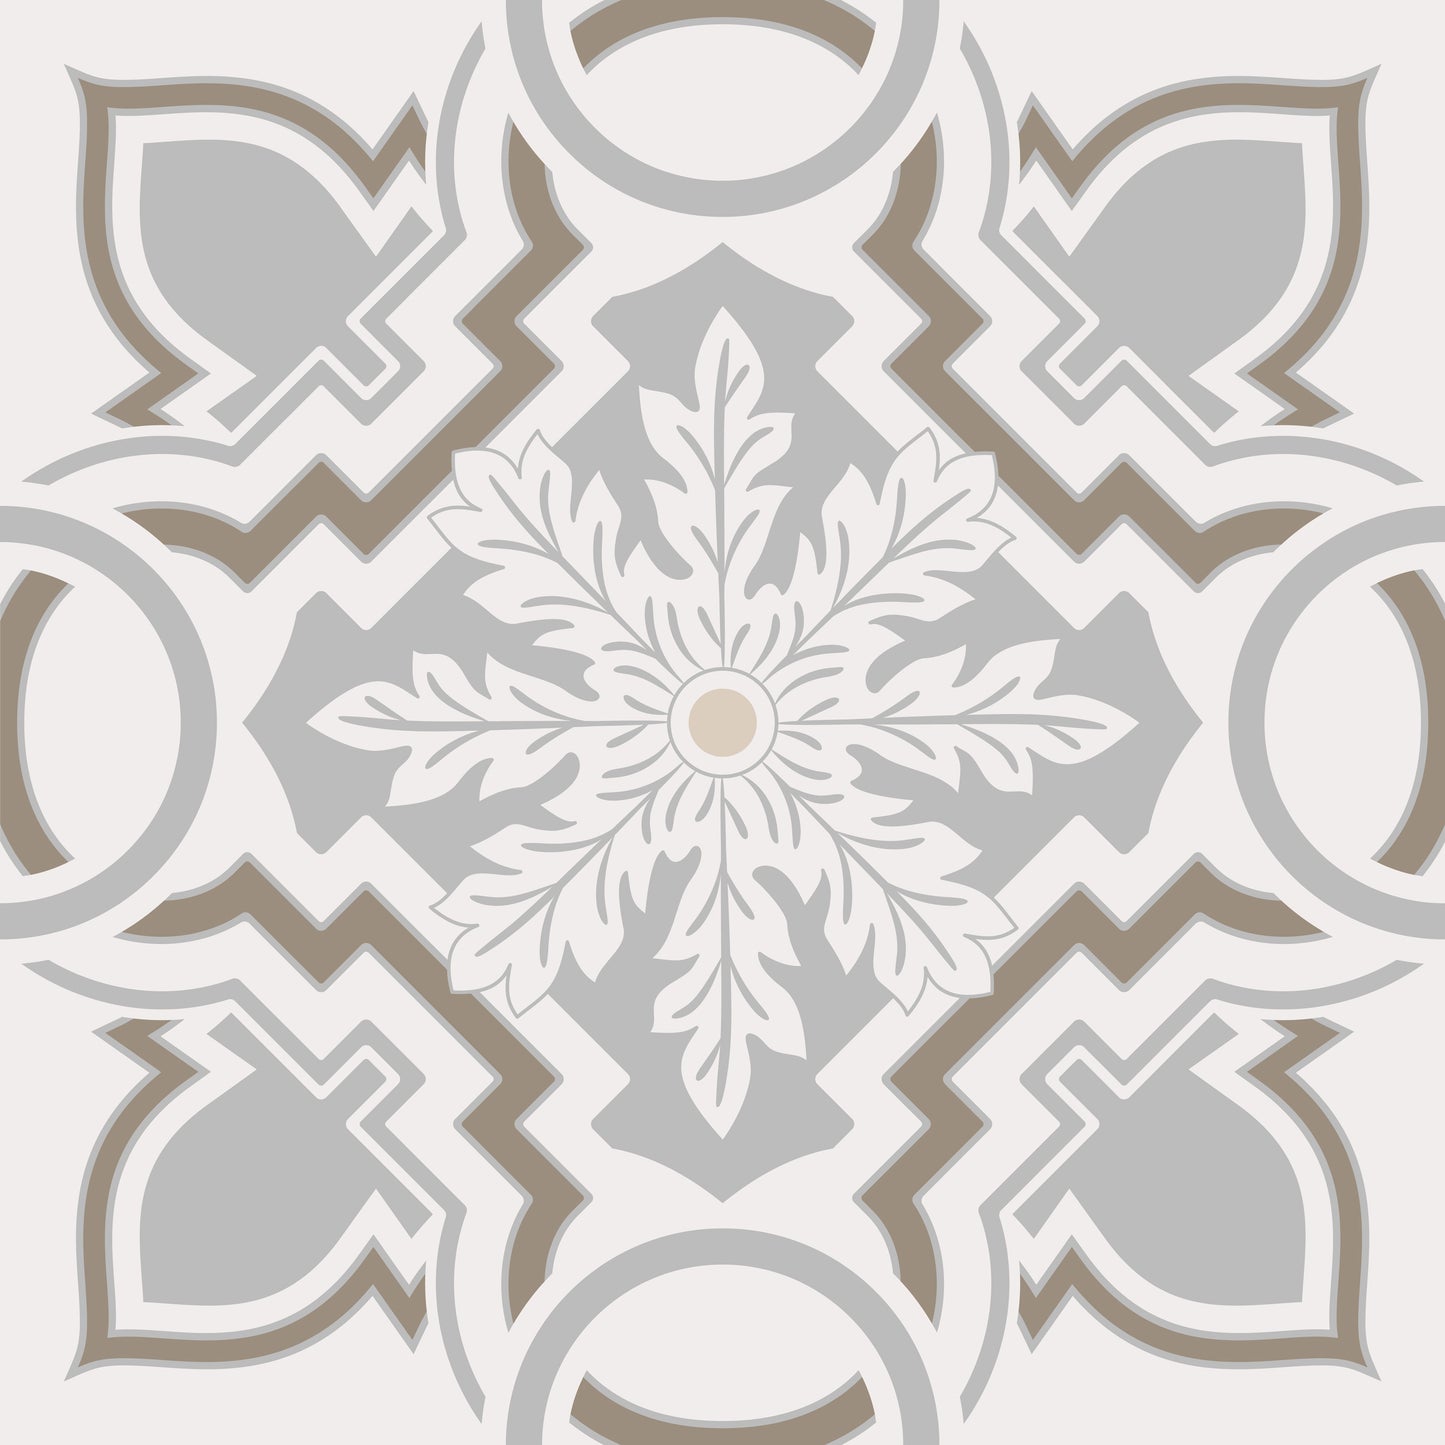 Grey Snowflake Cross Removeable Tile Stickers